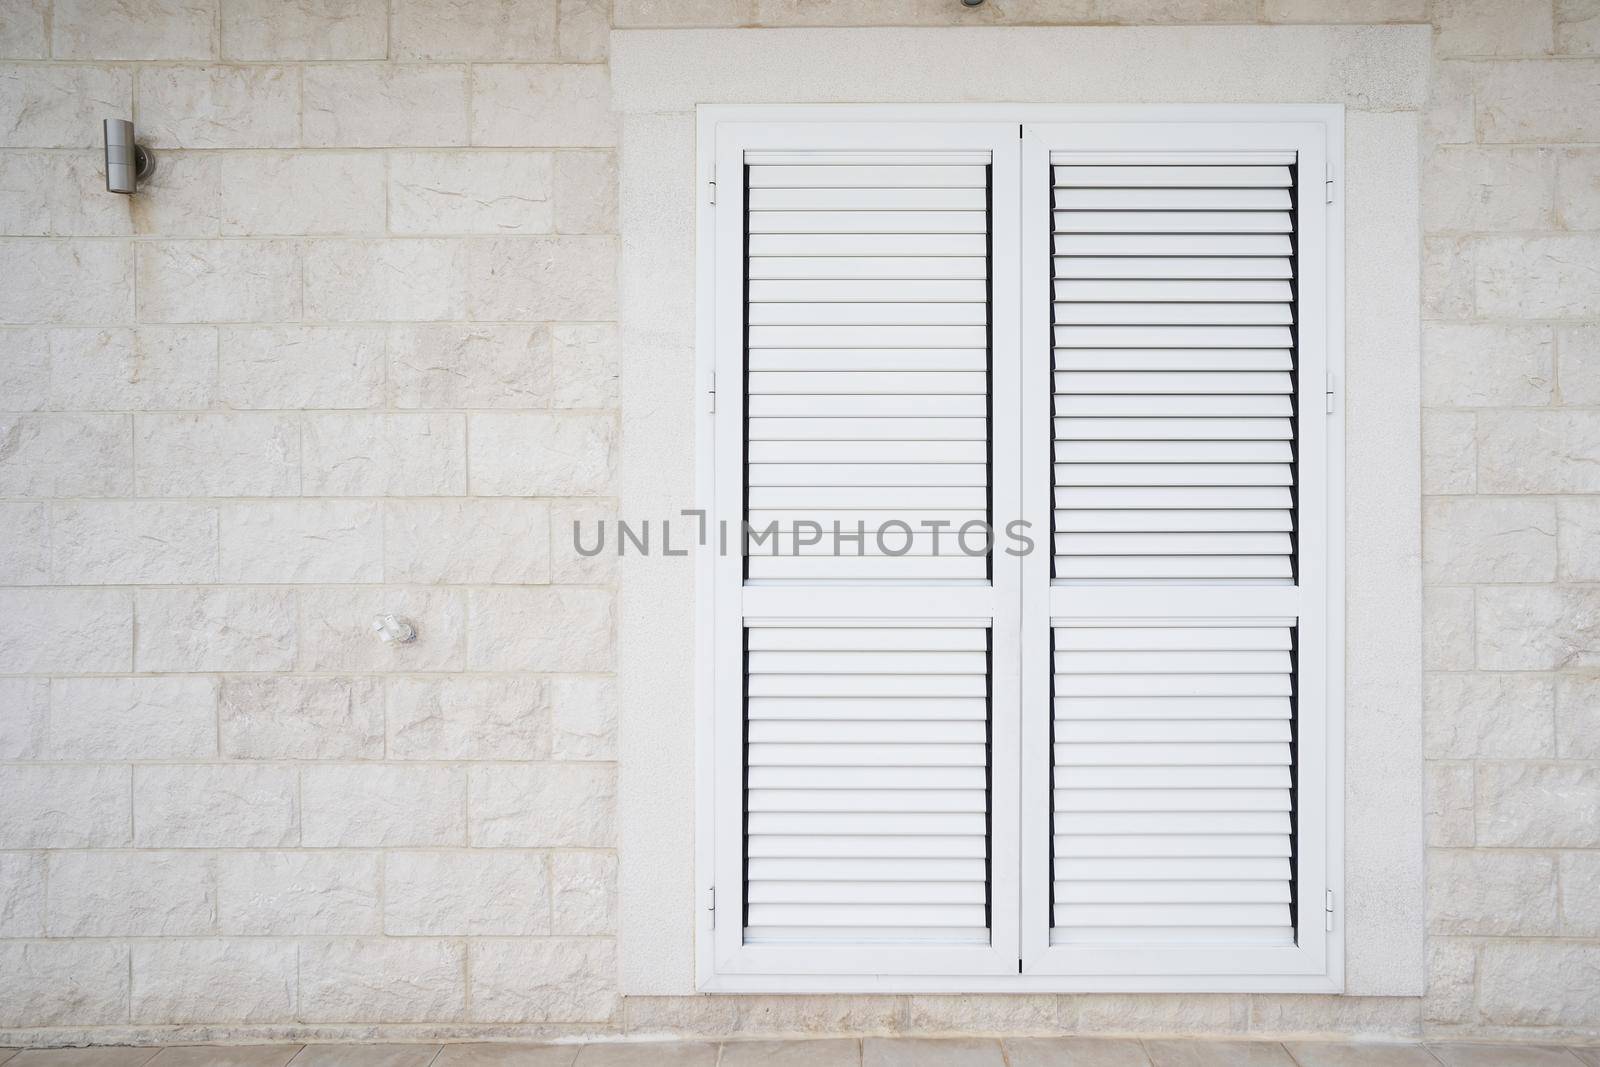 Plastic external window shutters on a residential building by iceberg